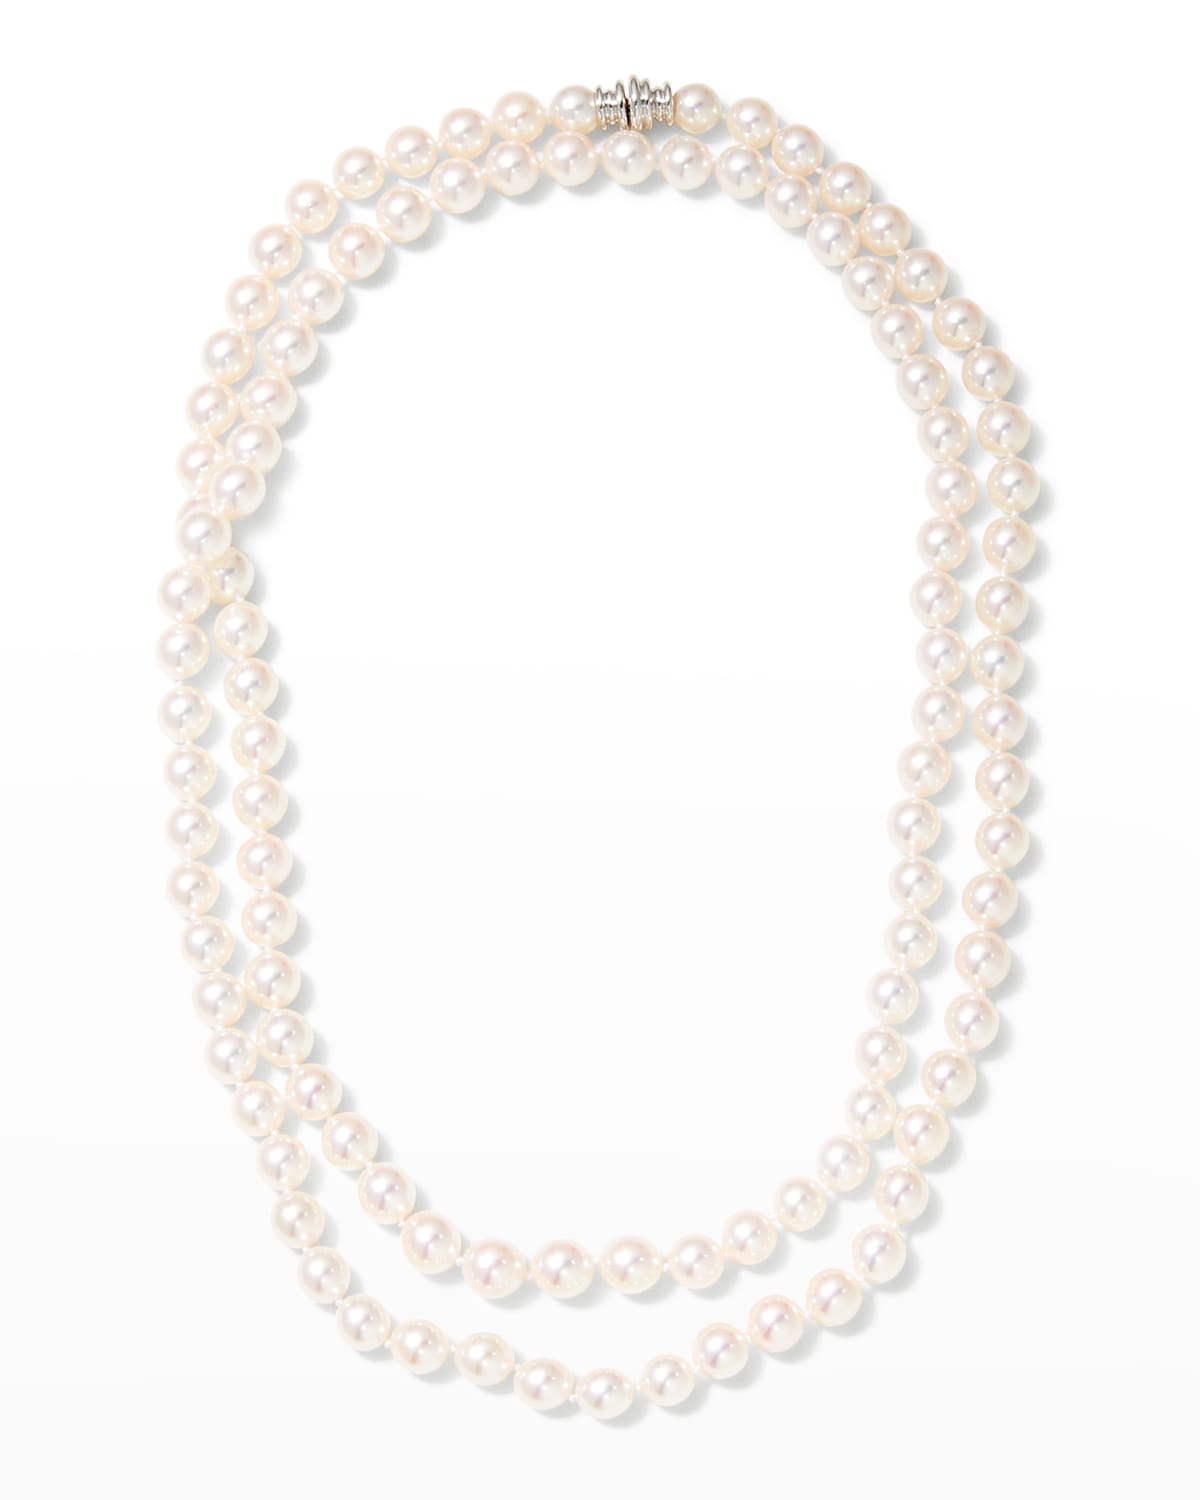 Assael 36" Akoya Cultured 8mm Pearl Necklace with White Gold Clasp